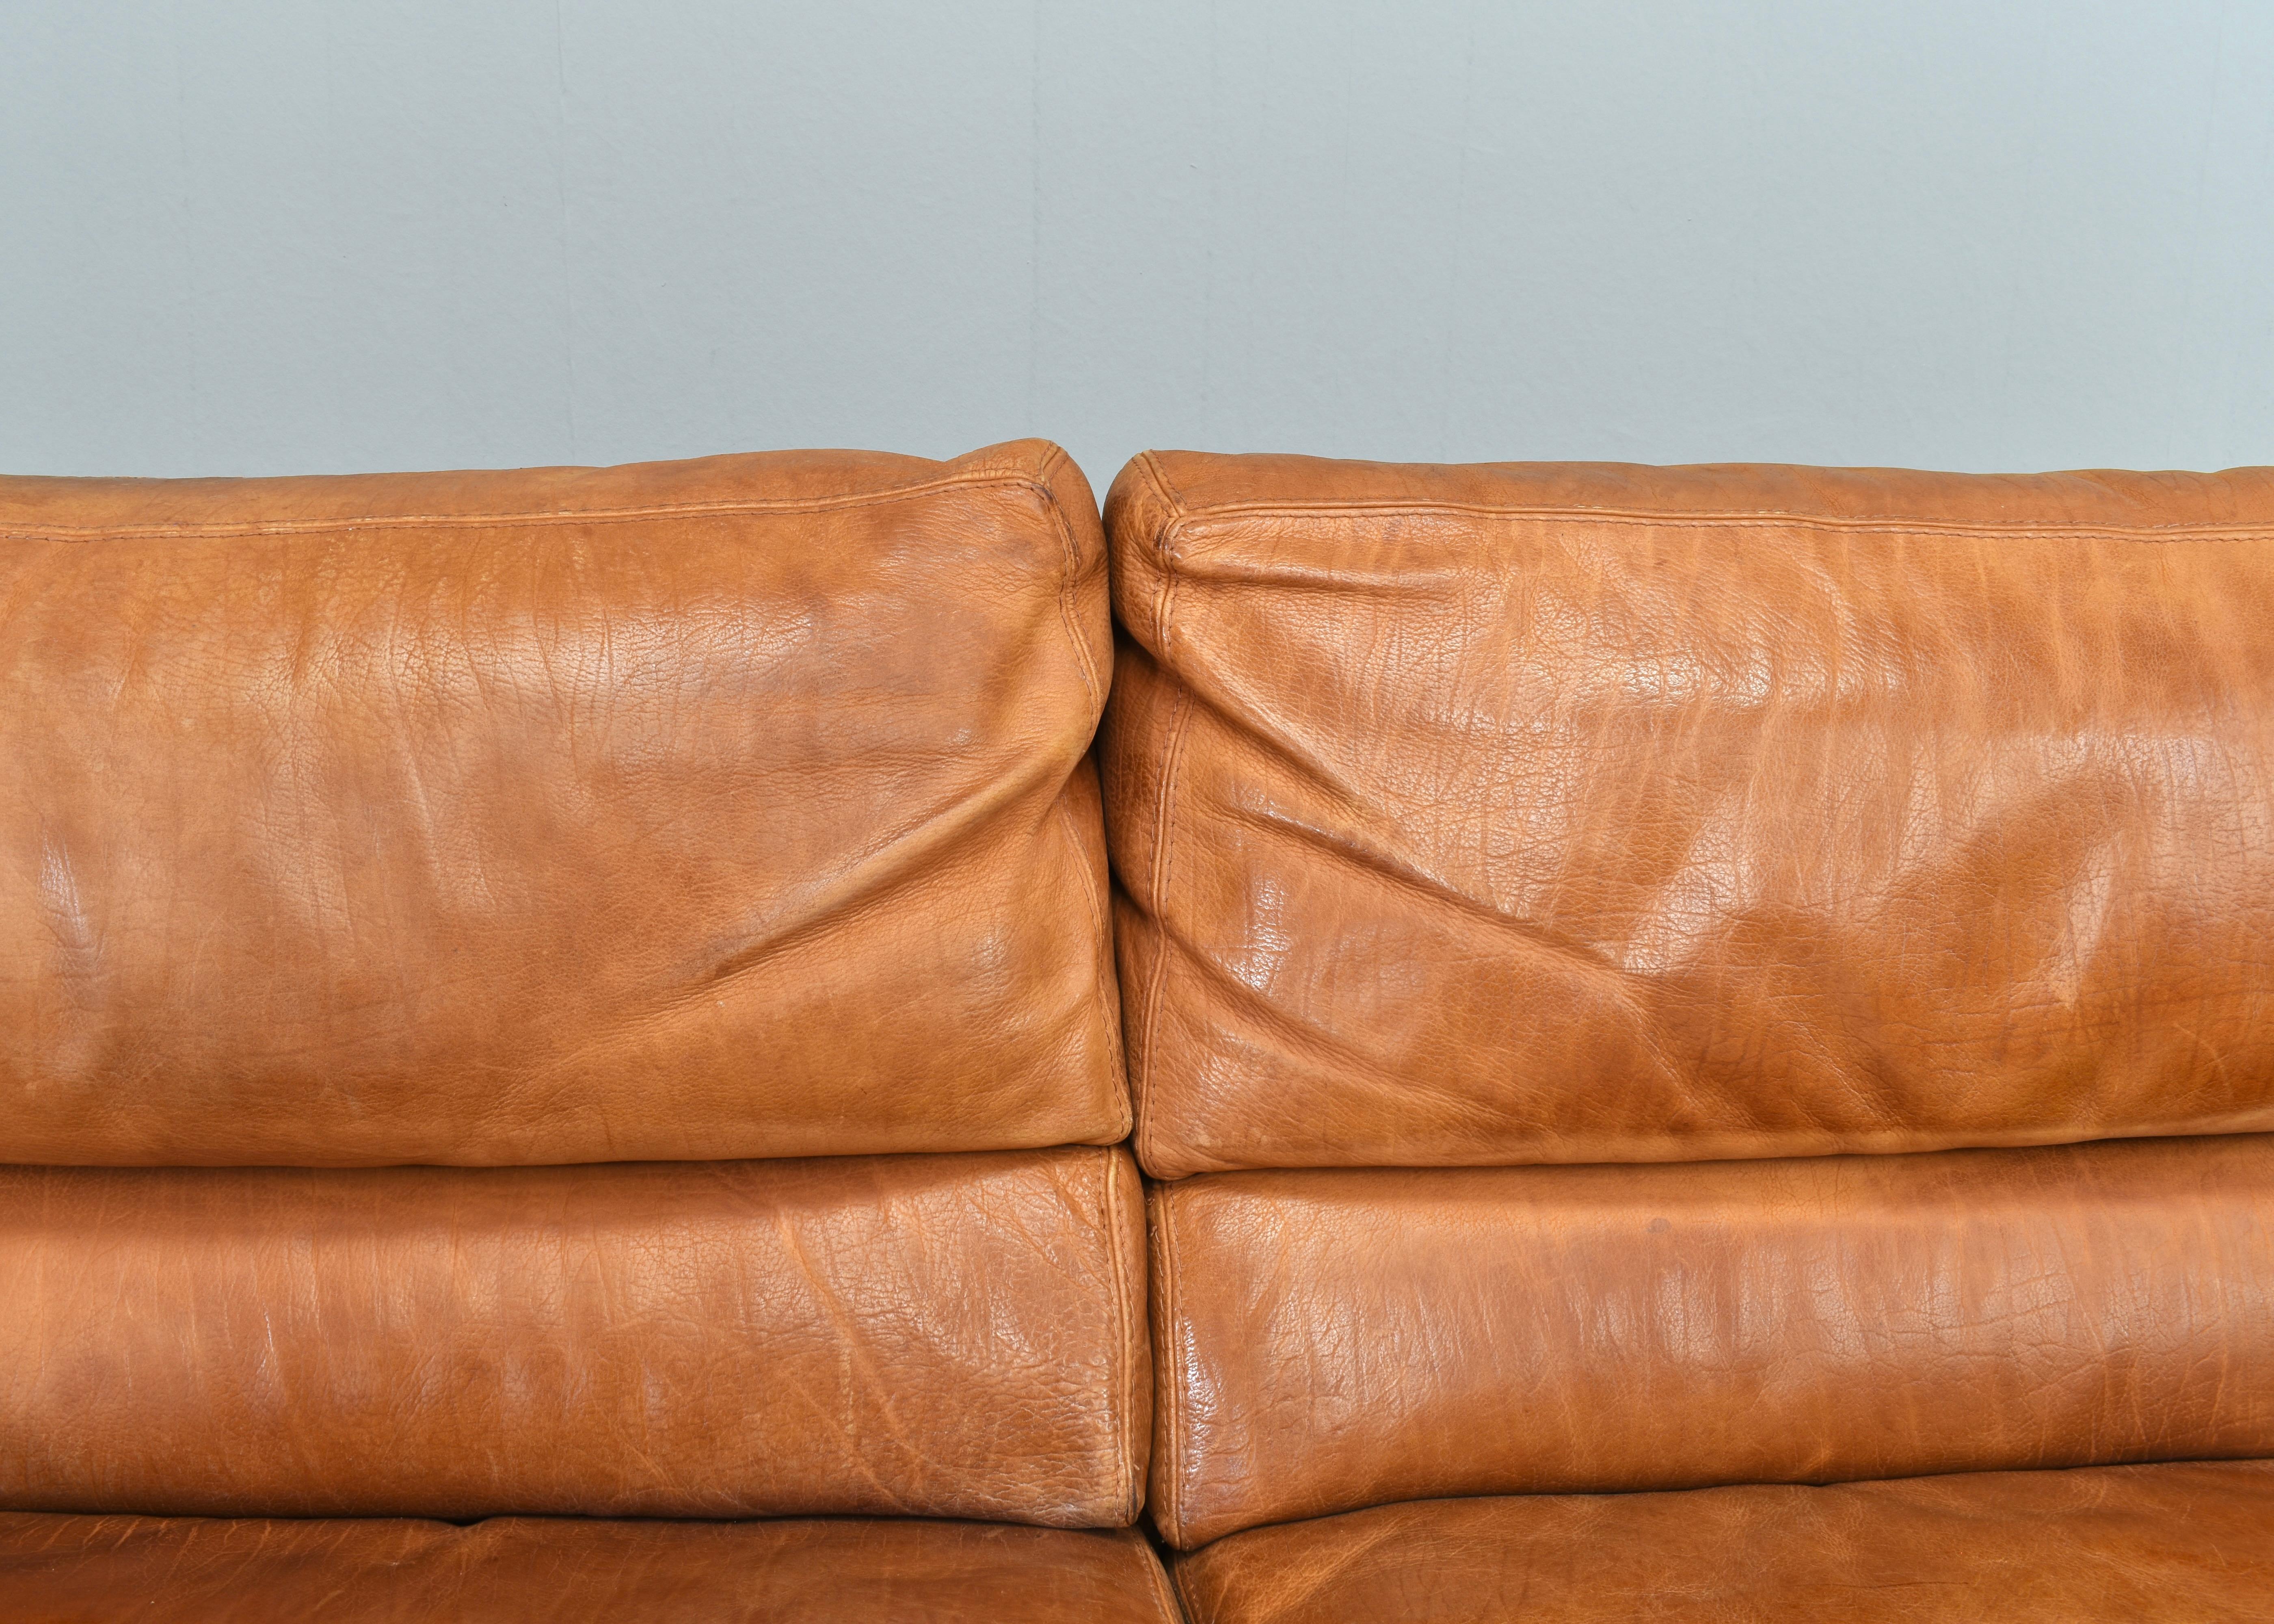 Roche Bobois sofa in patinated Tan / Cognac leather – France, circa 1970/80 For Sale 2